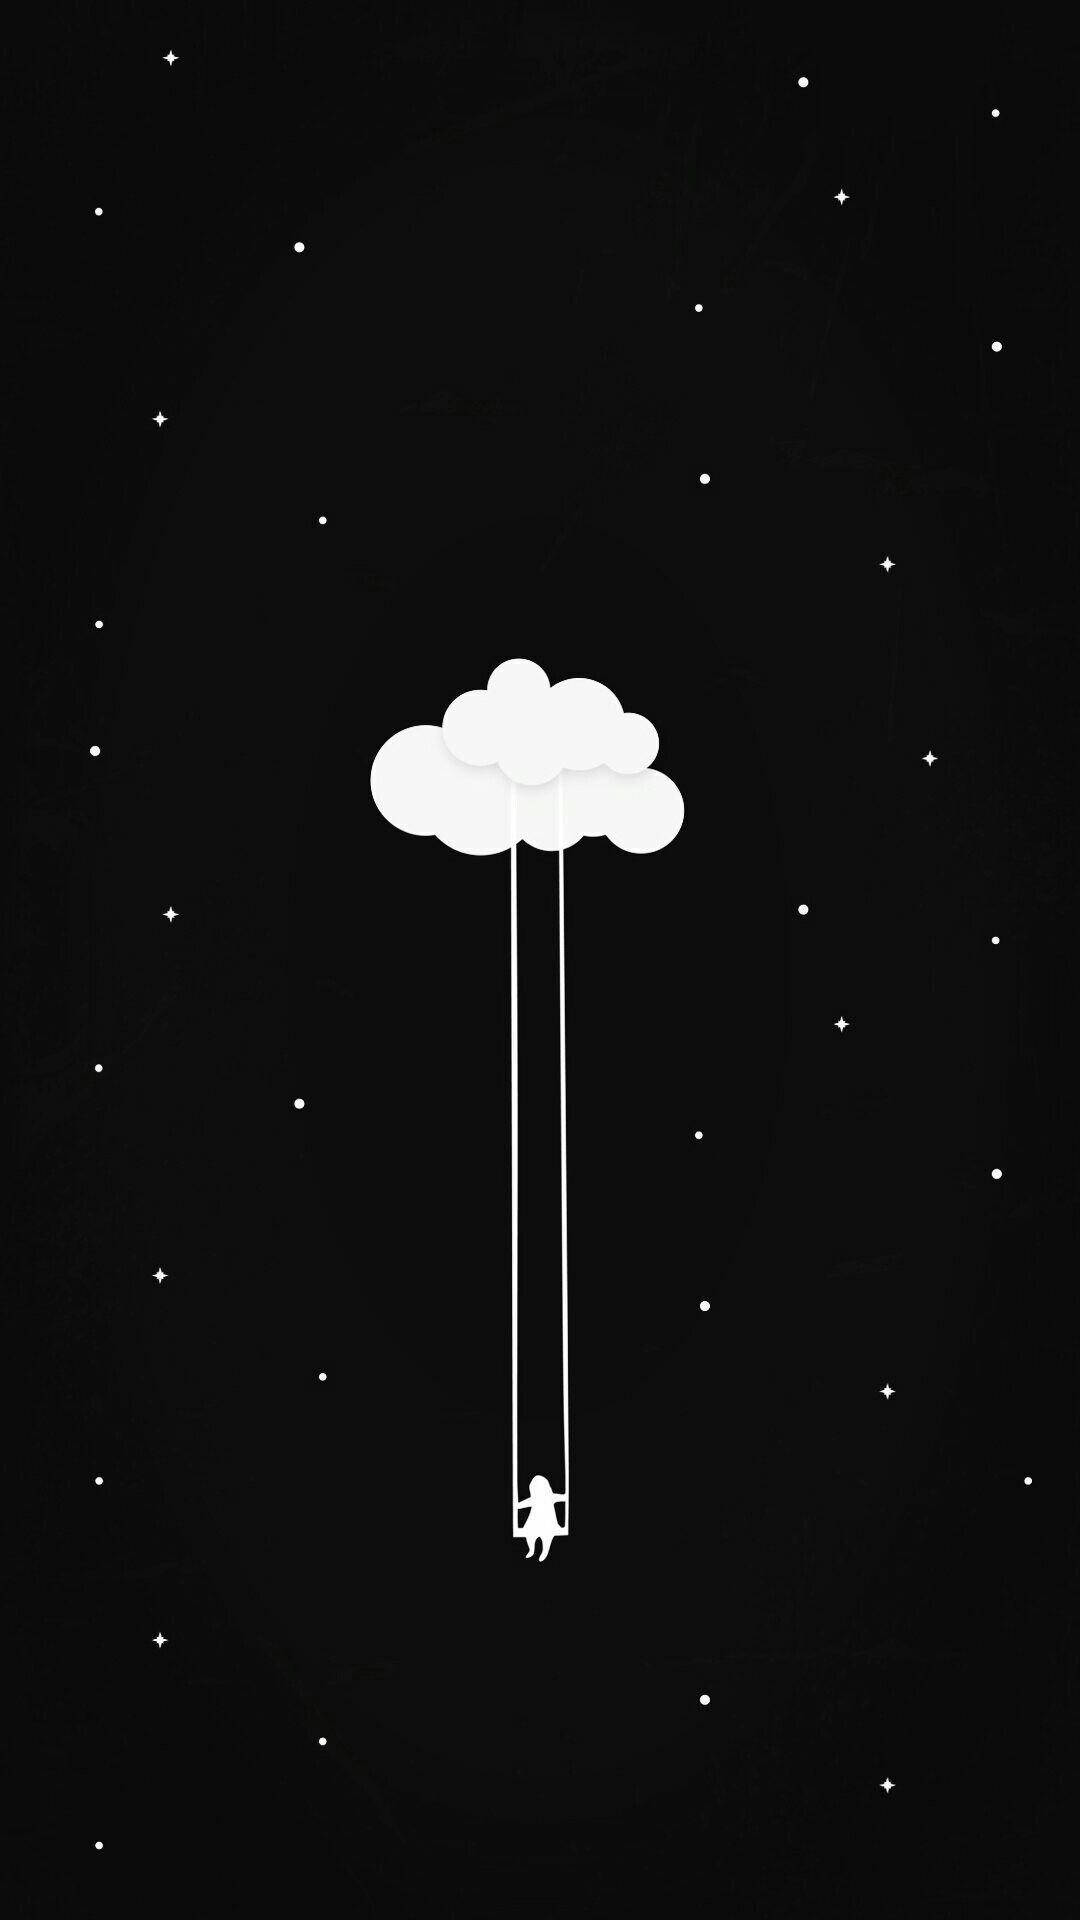 Cute Black And White Aesthetic Girl Swinging From Cloud Background